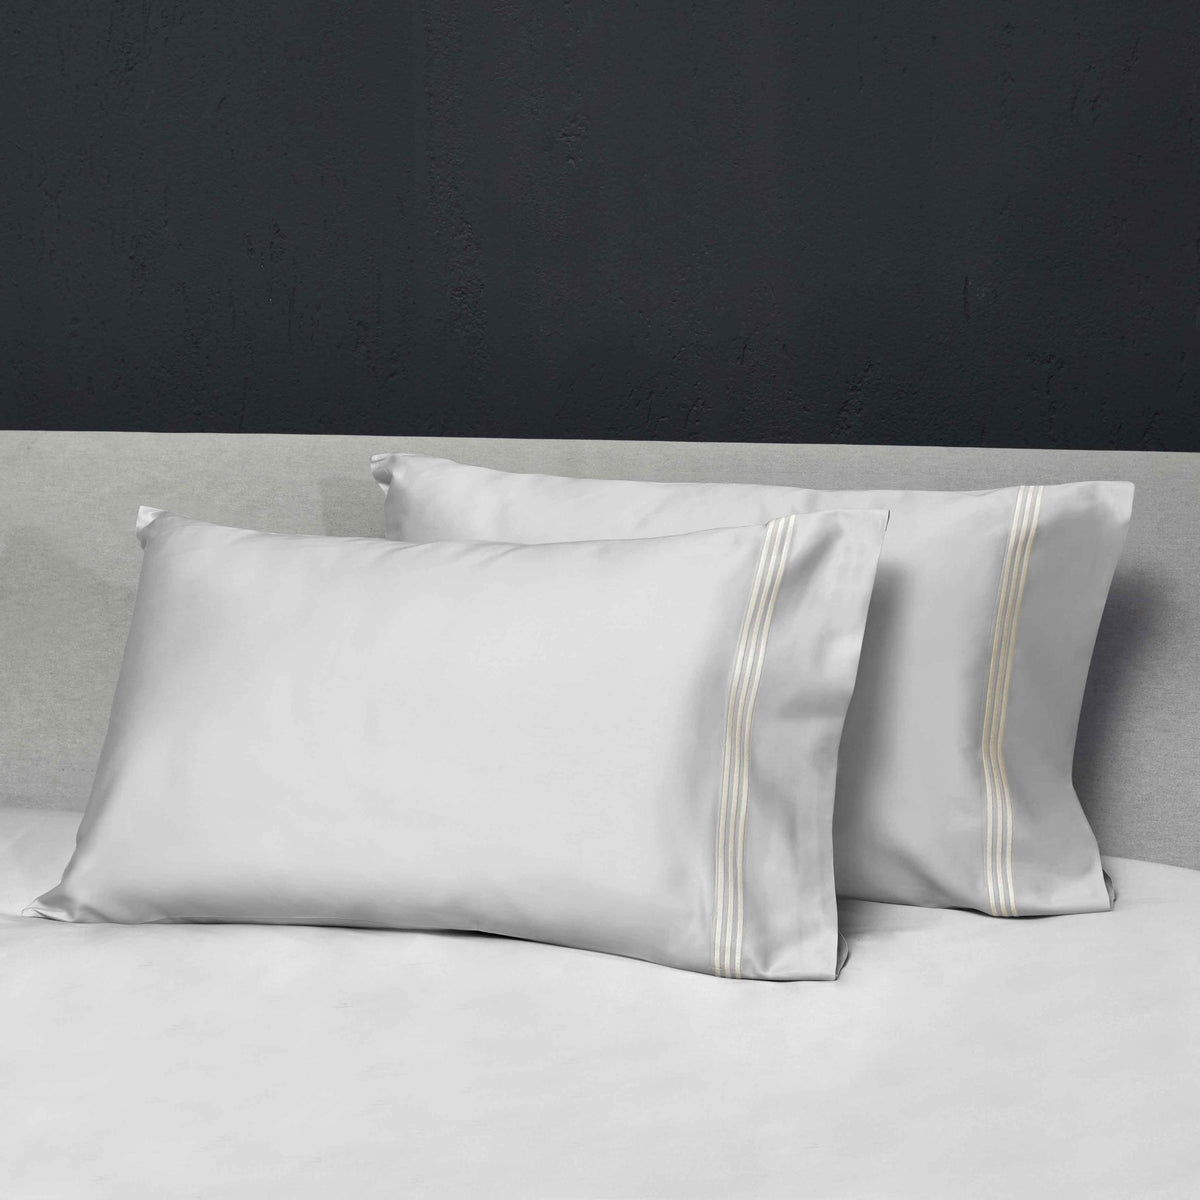 Pair of Pillowcases of Signoria Platinum Sateen Bedding in Pearl/Ivory Color